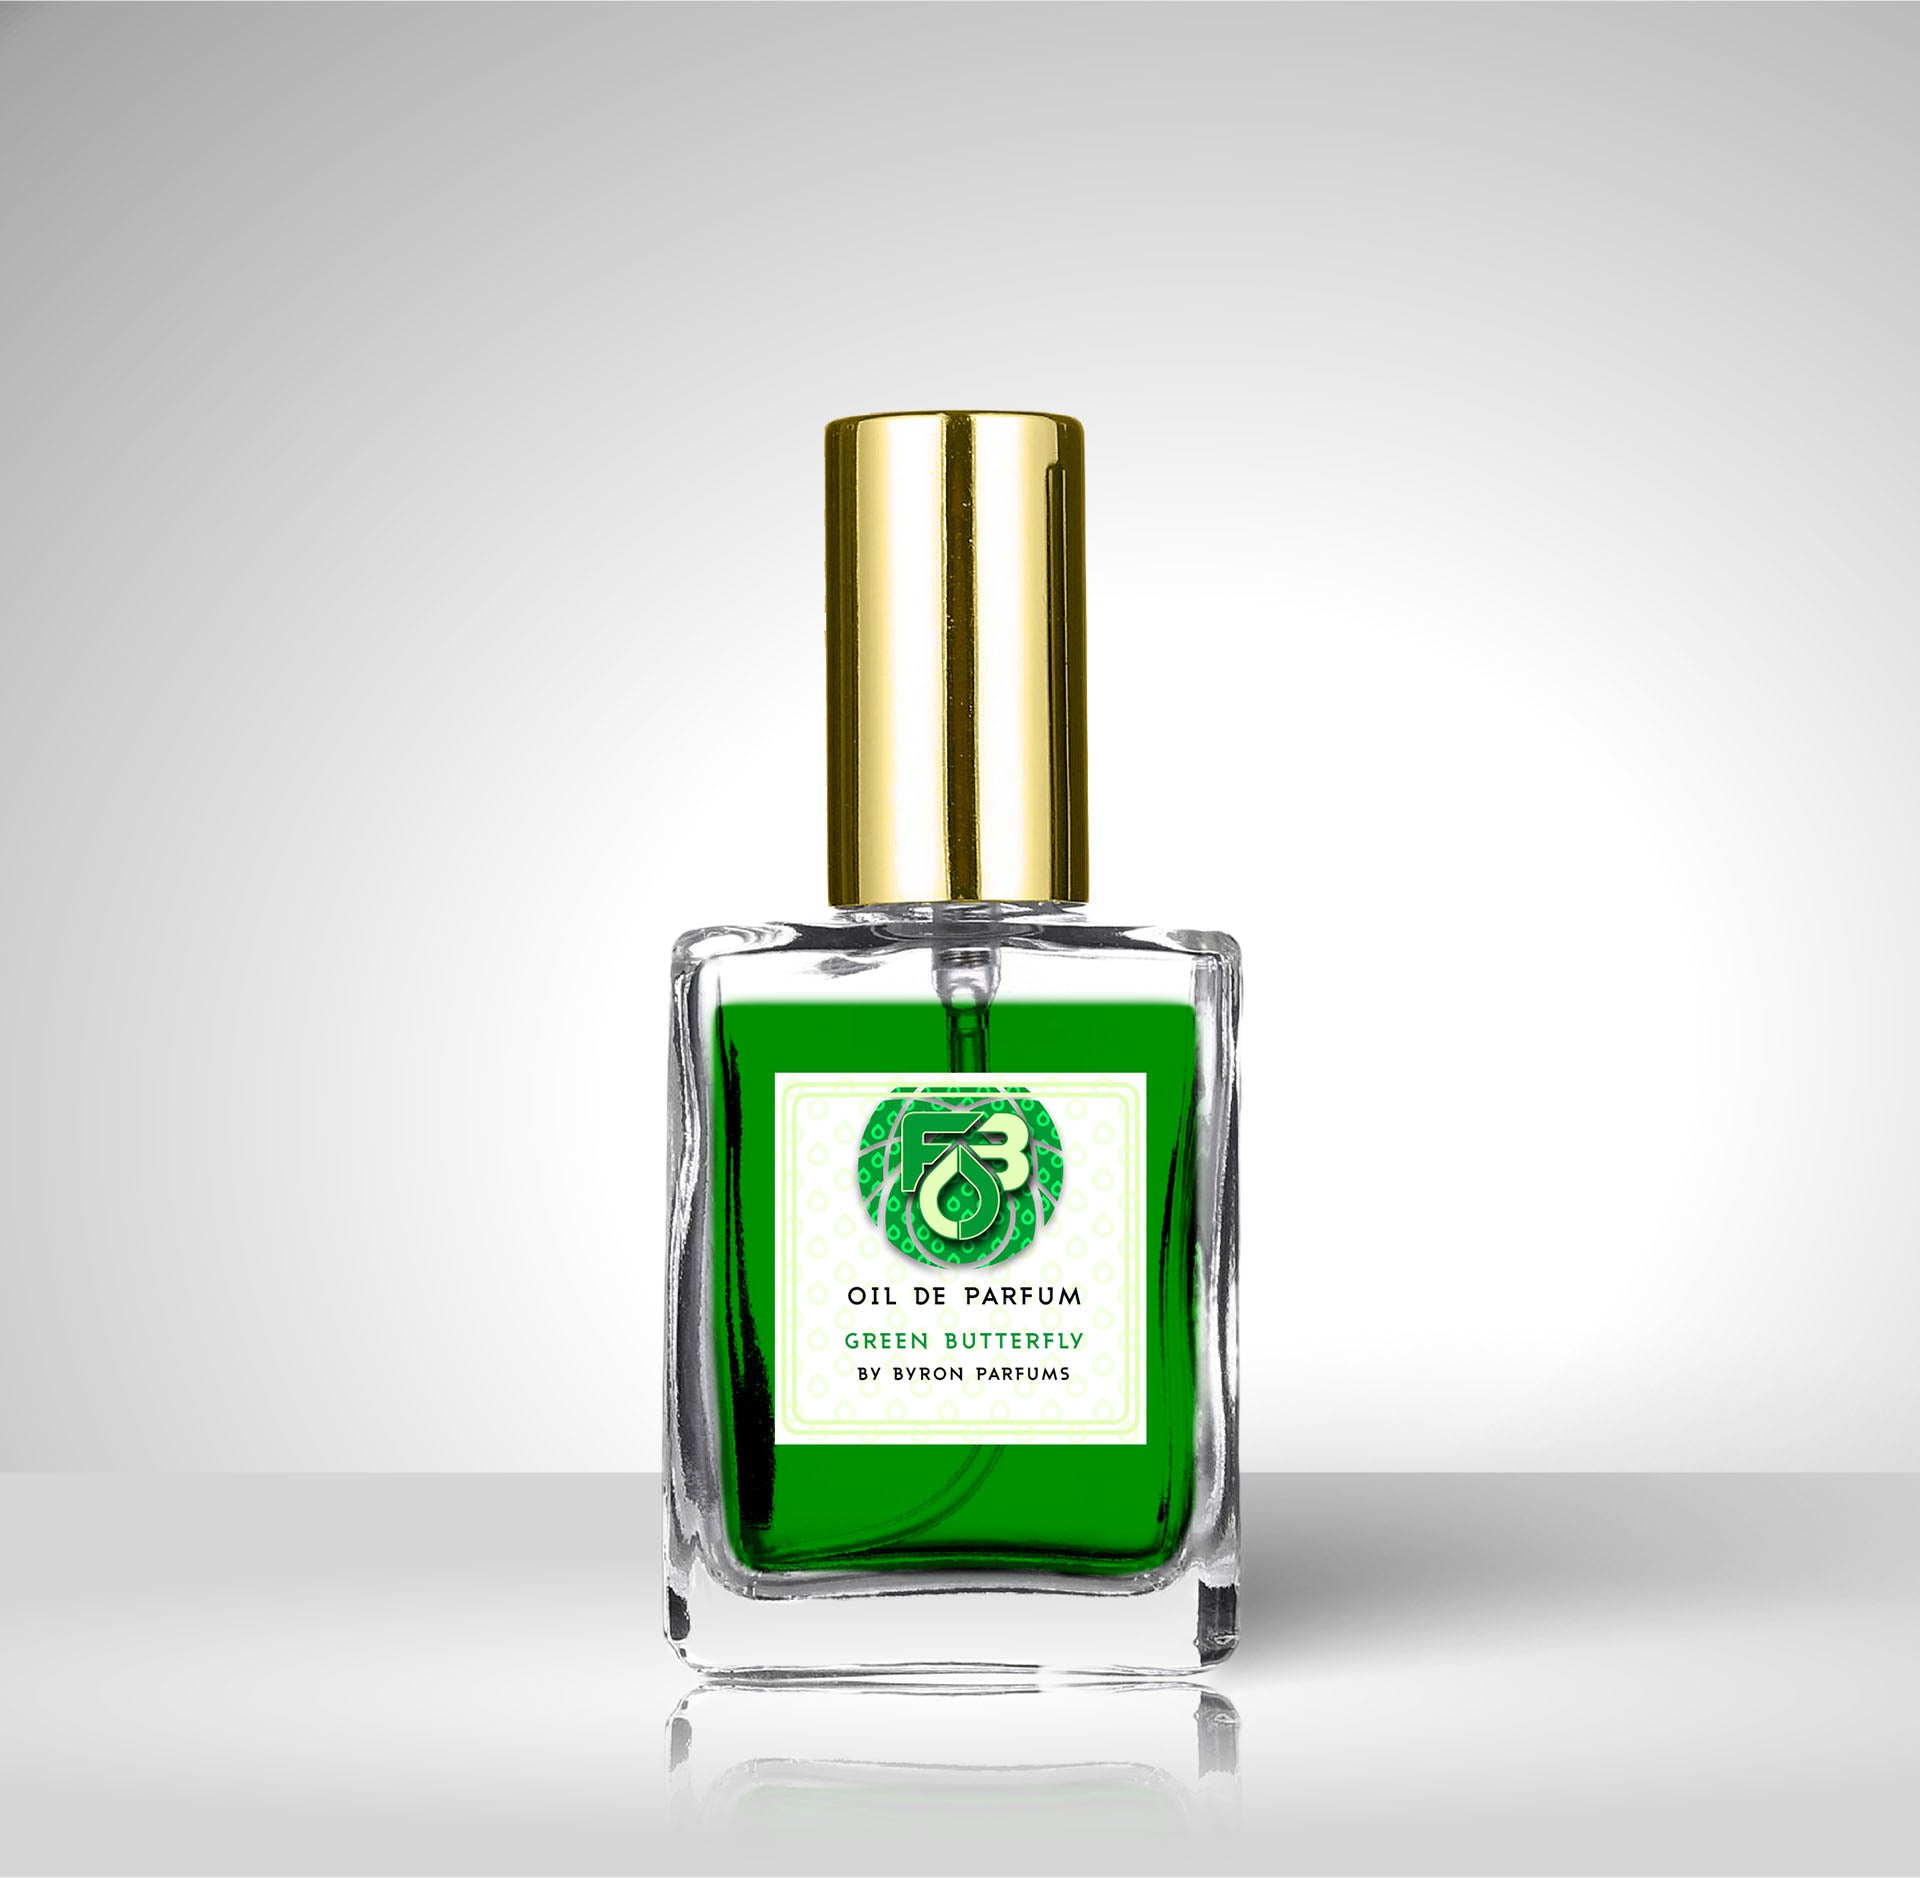 Compare Aroma To Green Butterfly